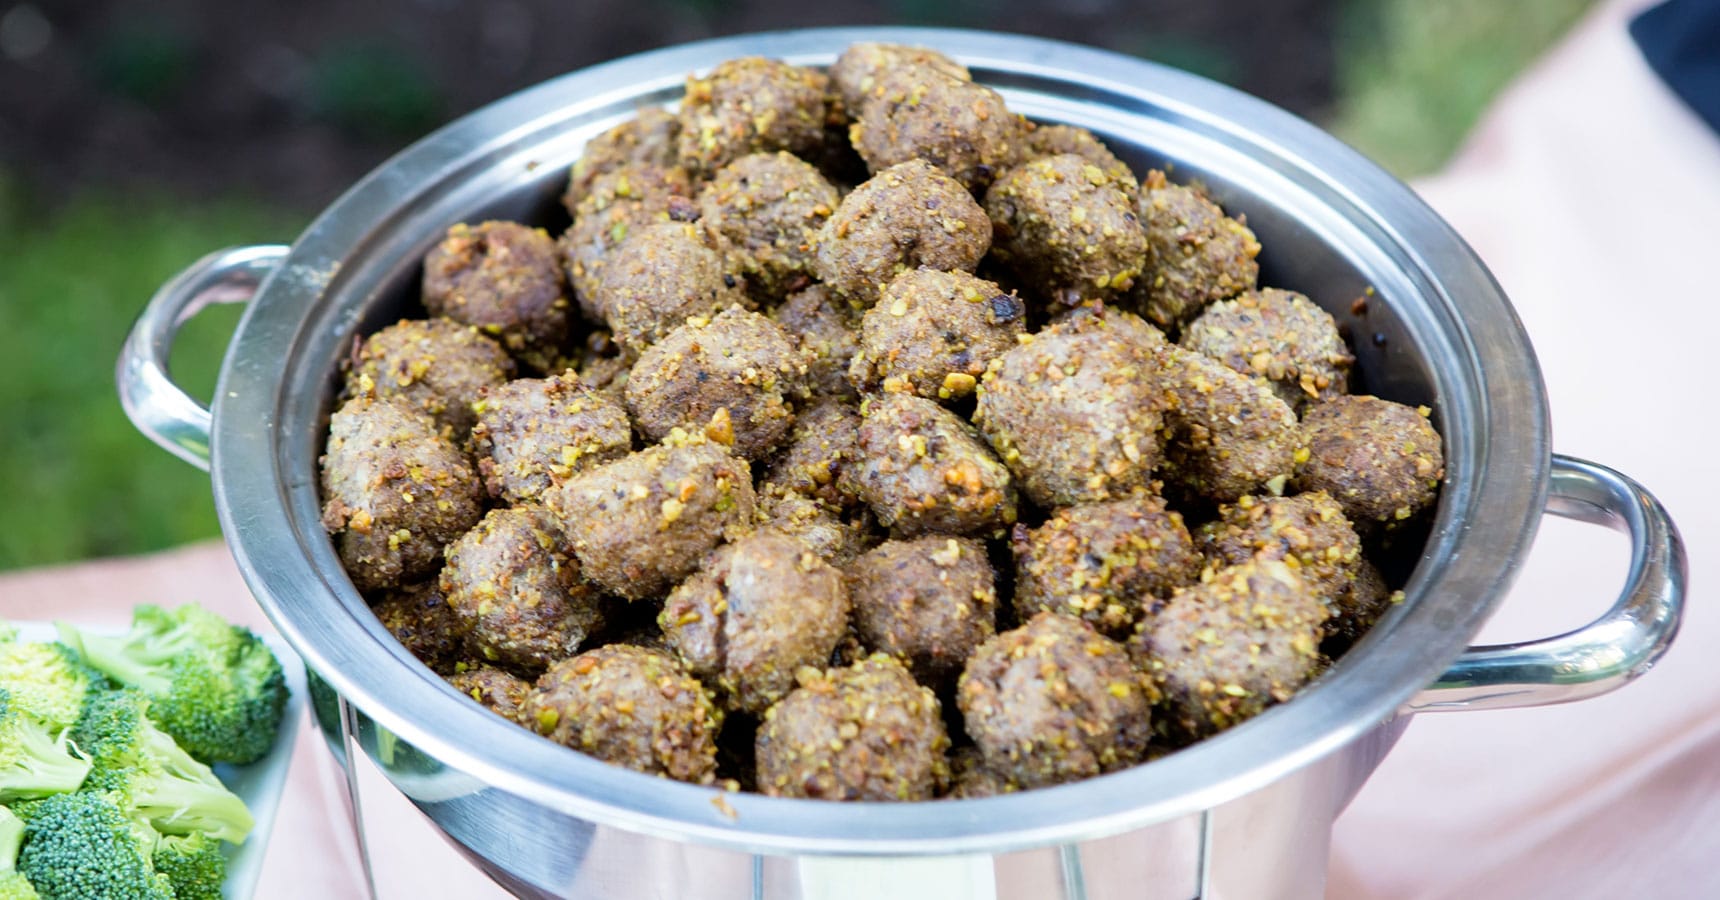 Pistachio Crusted Lamb Meatballs from Crave Catering's Mediterranean Station